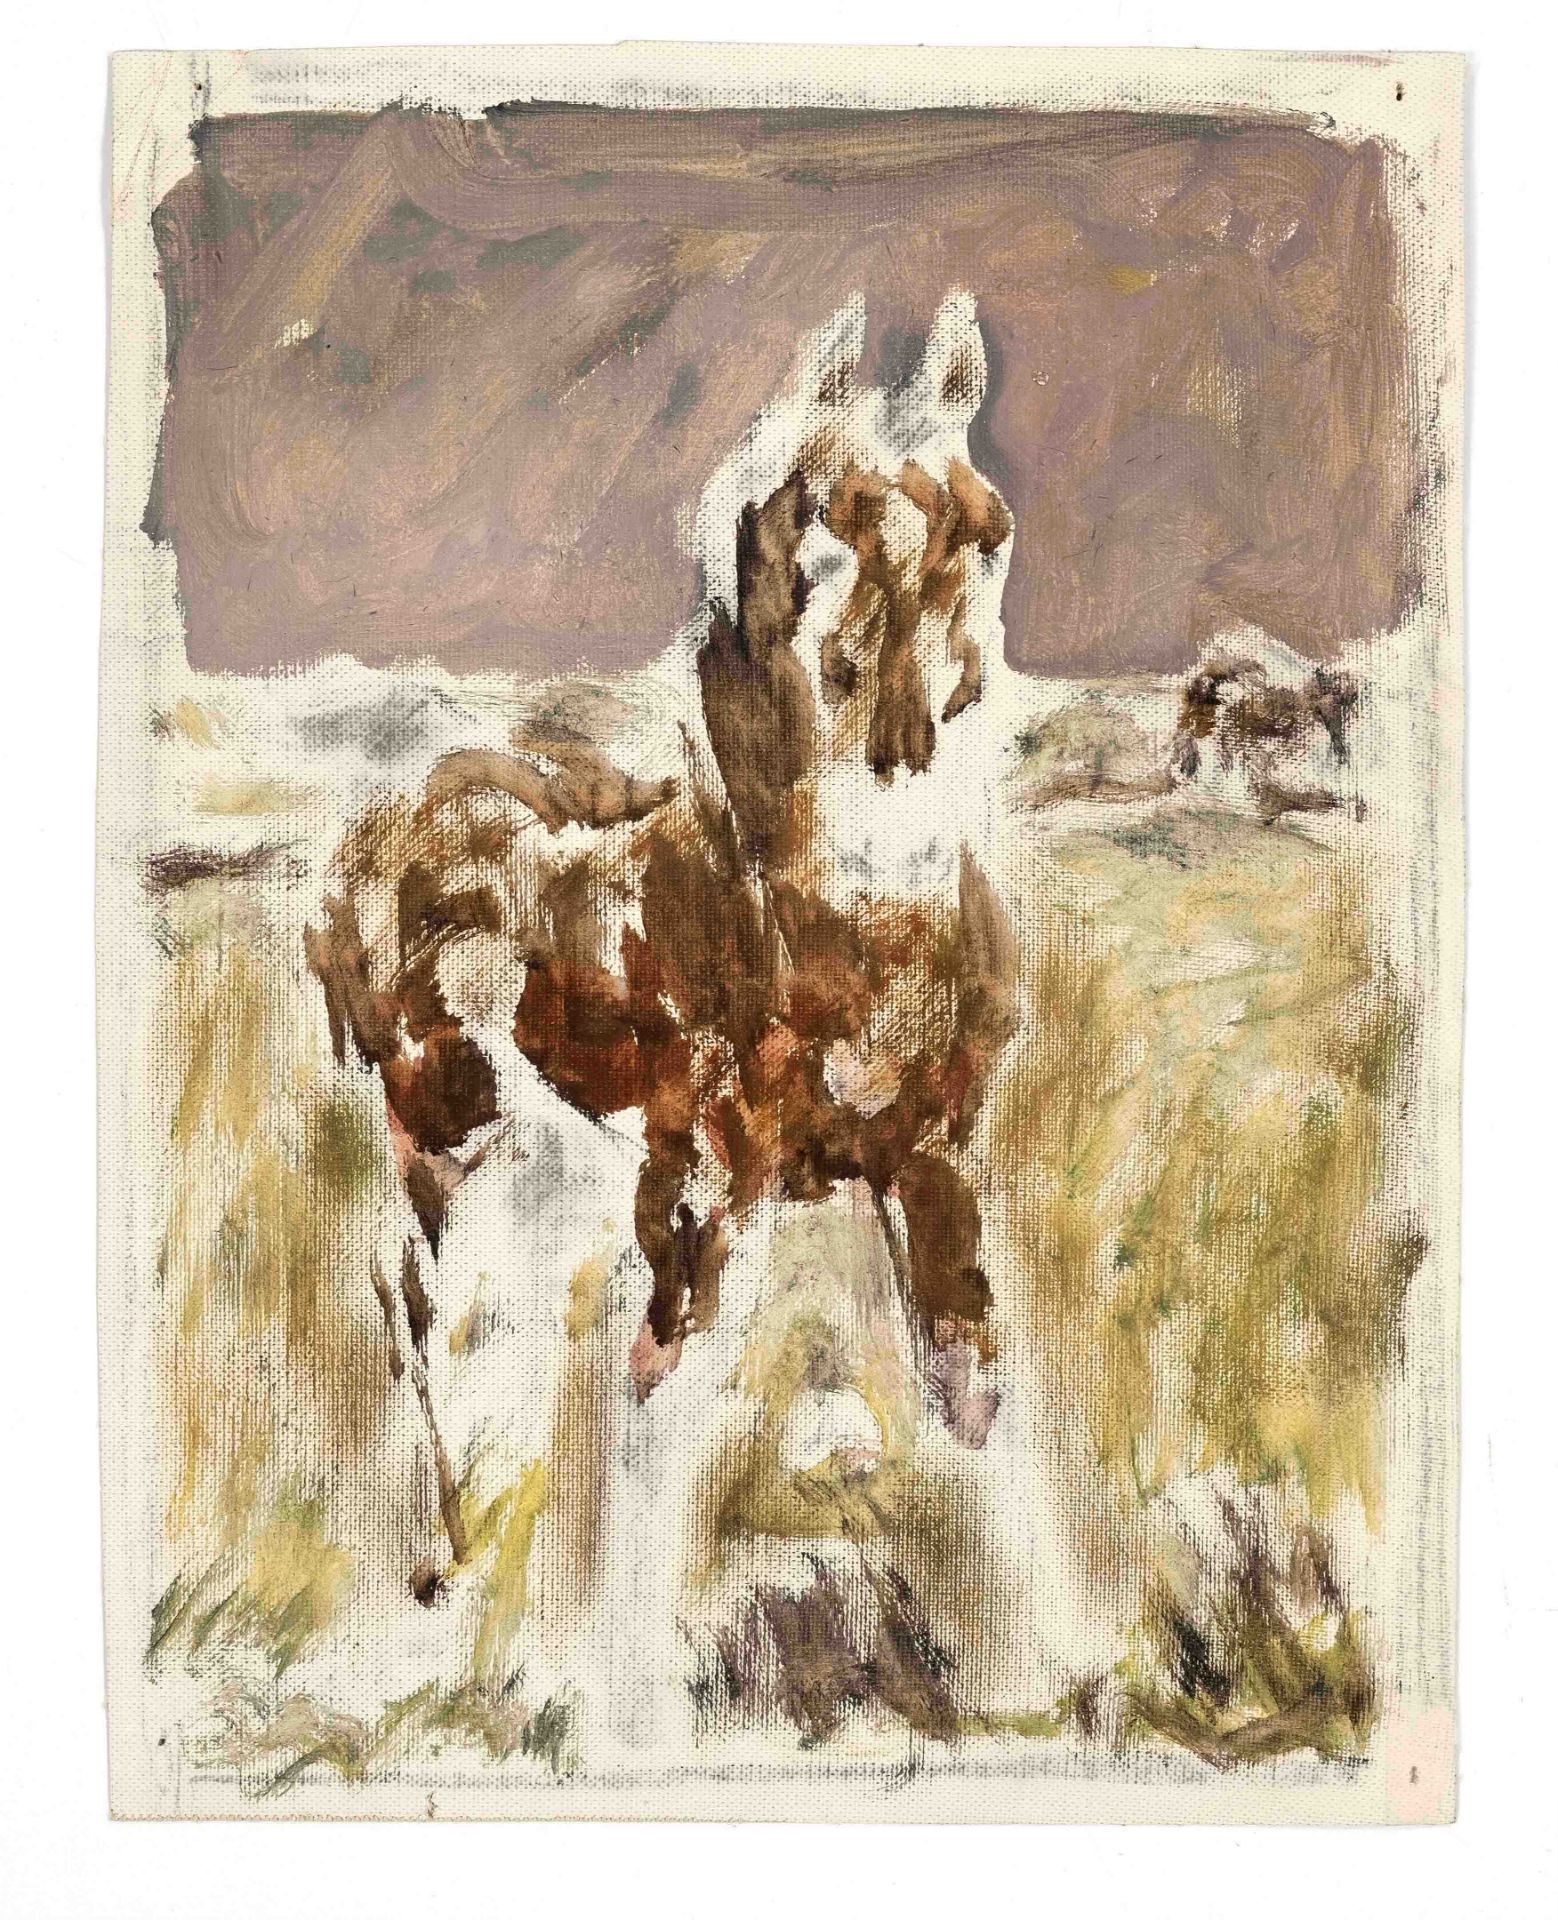 Focke, Wilhelm H. 1878 - Bremen - 1974. Study of a horse standing in the pasture. Probably 1960s.